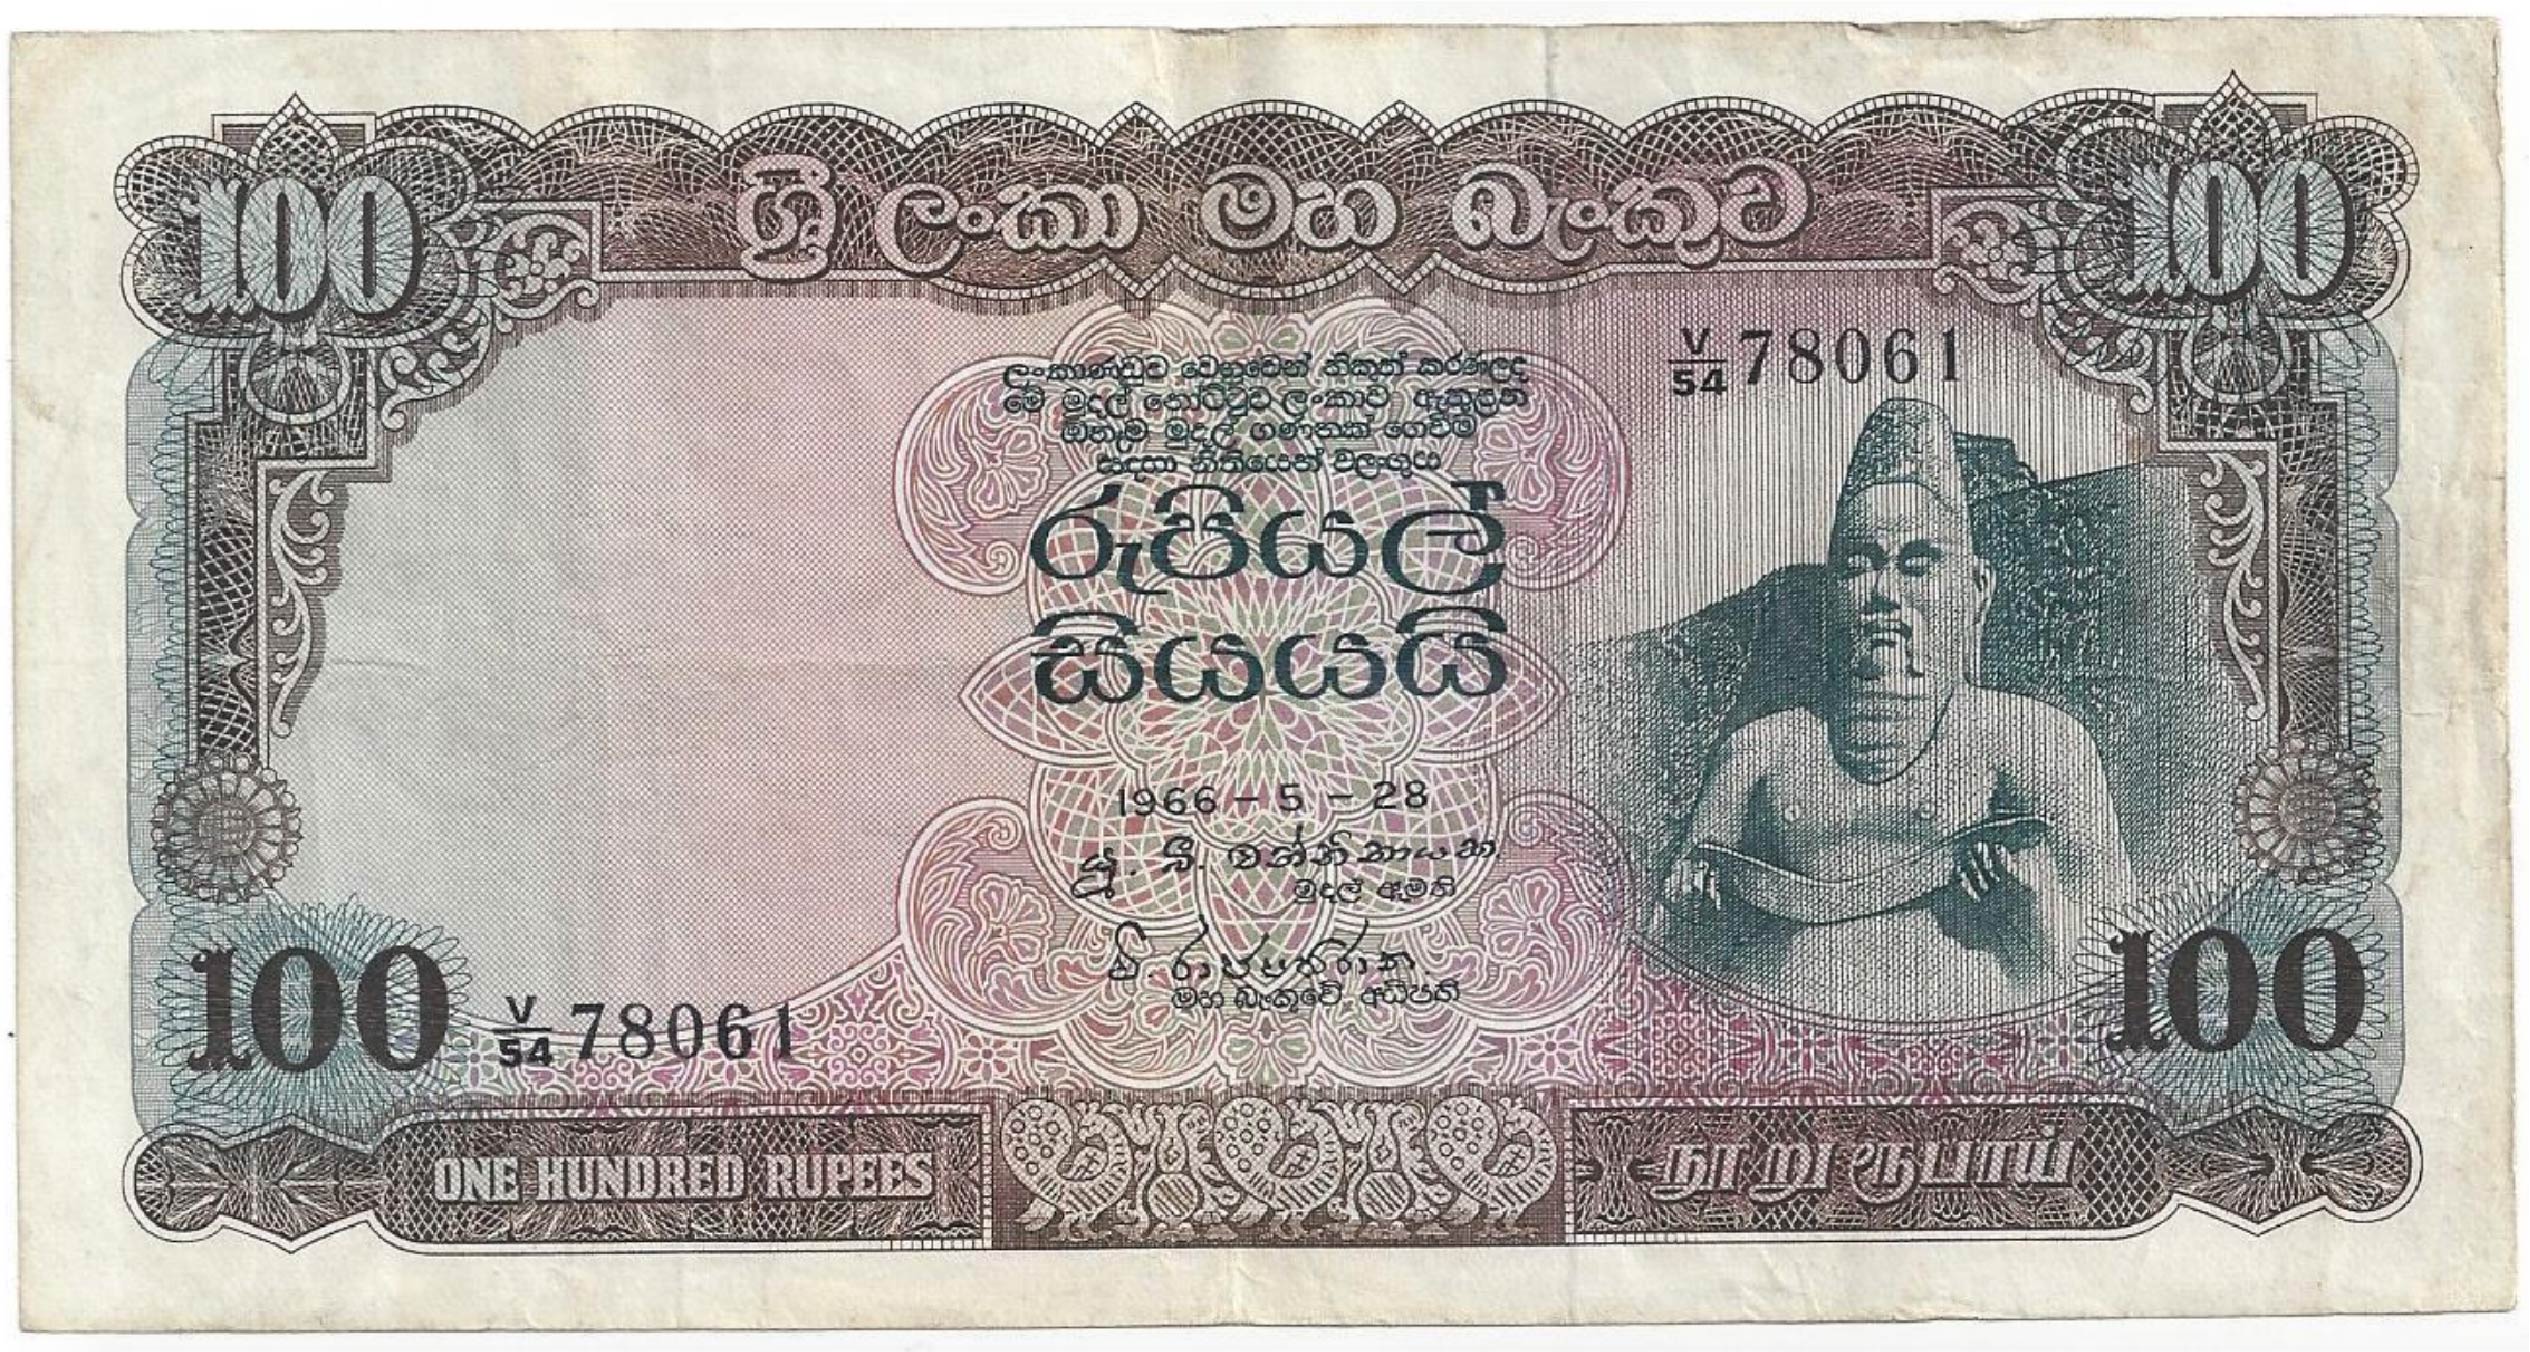 100 rupees Central Bank of Ceylon banknote (King Parakramabahu I statue)